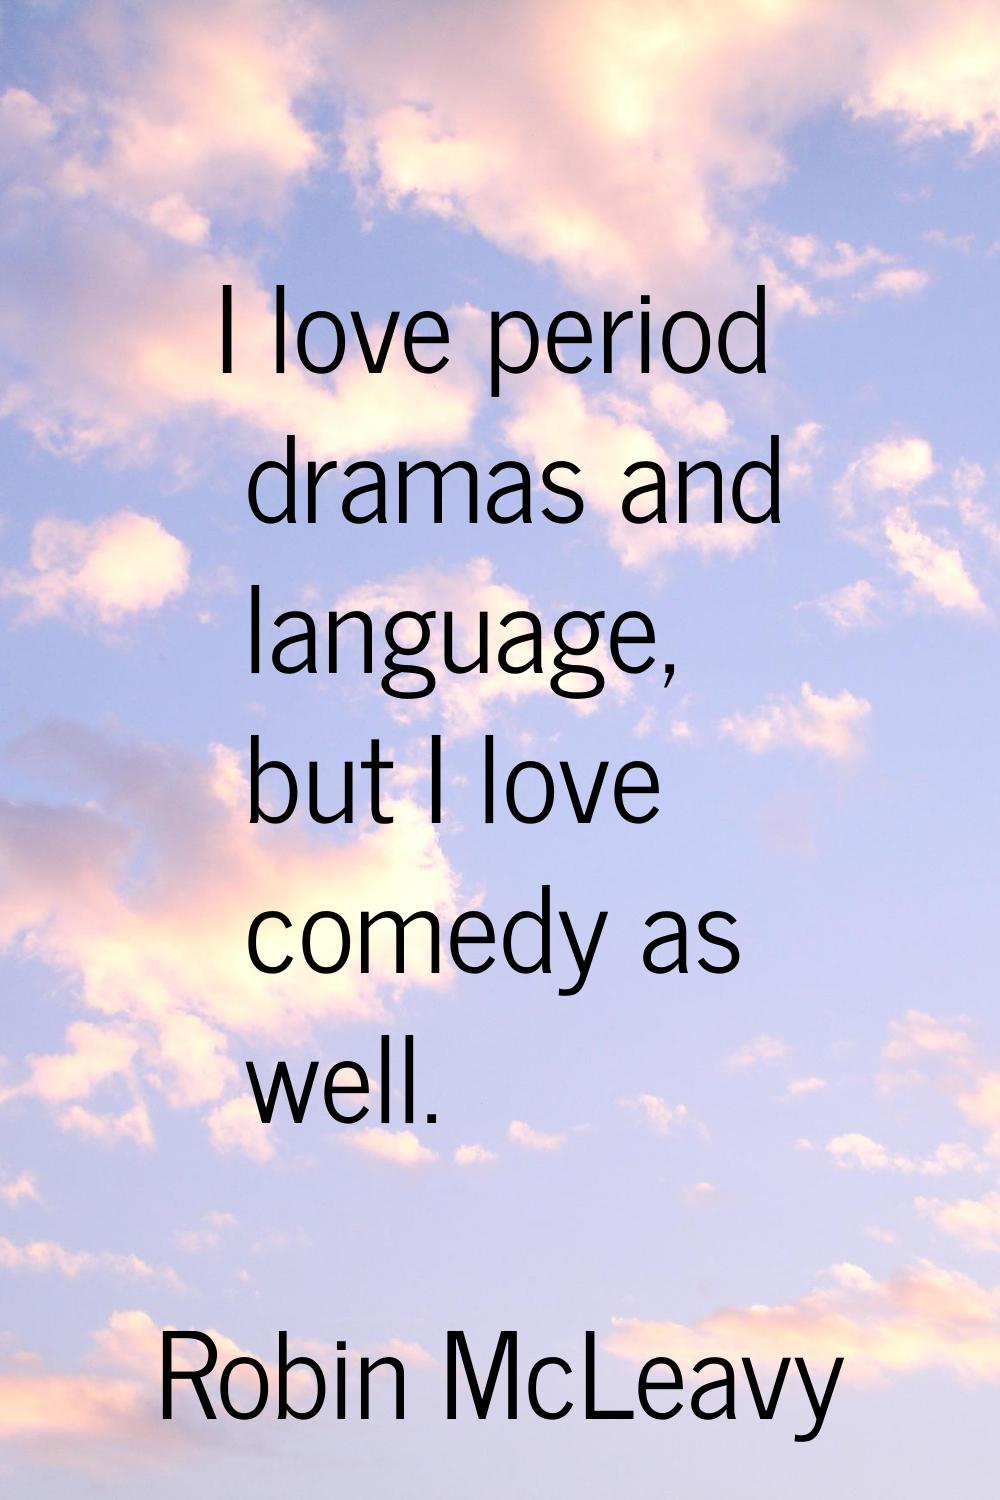 I love period dramas and language, but I love comedy as well.